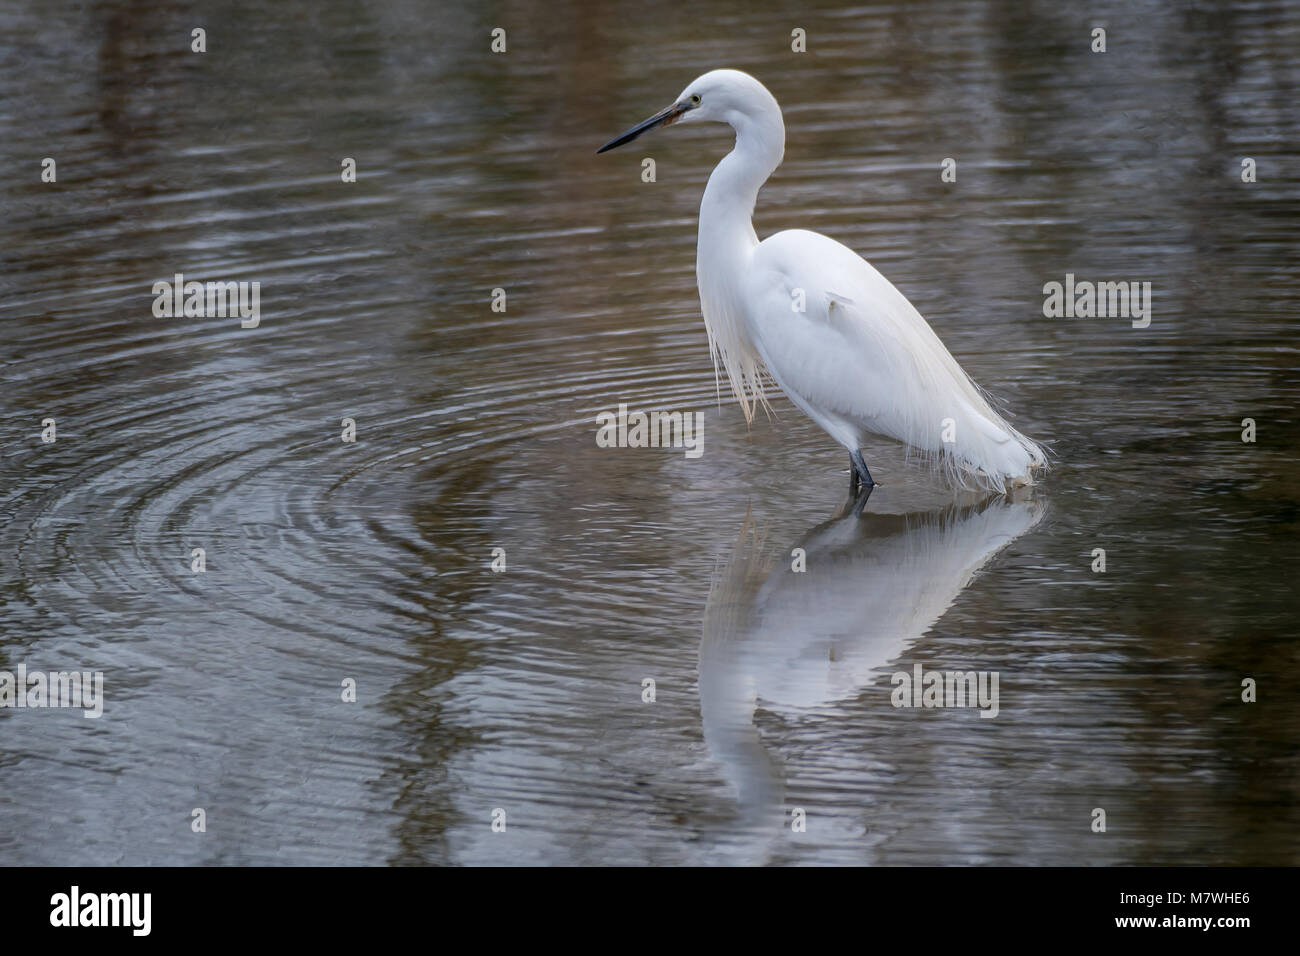 Little egret standing in a pool fishing with a reflection in the water Stock Photo